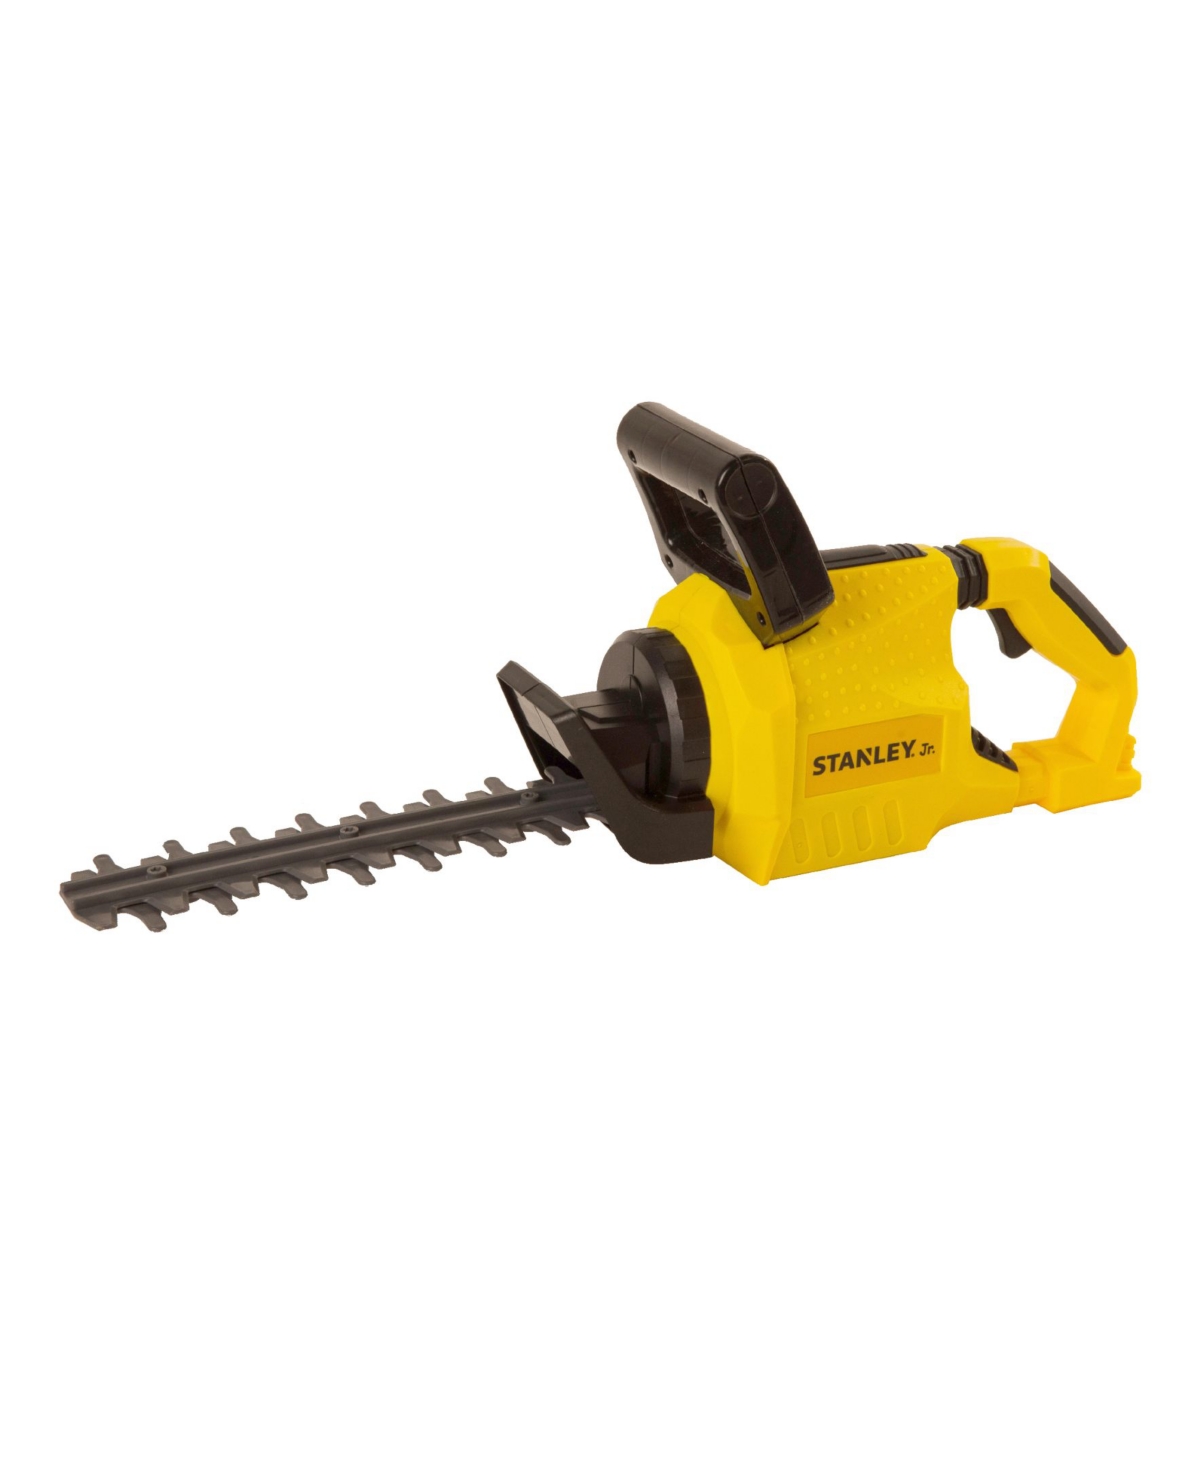 Stanley Jr. Battery Operated Hedge Trimmer In Black,yellow